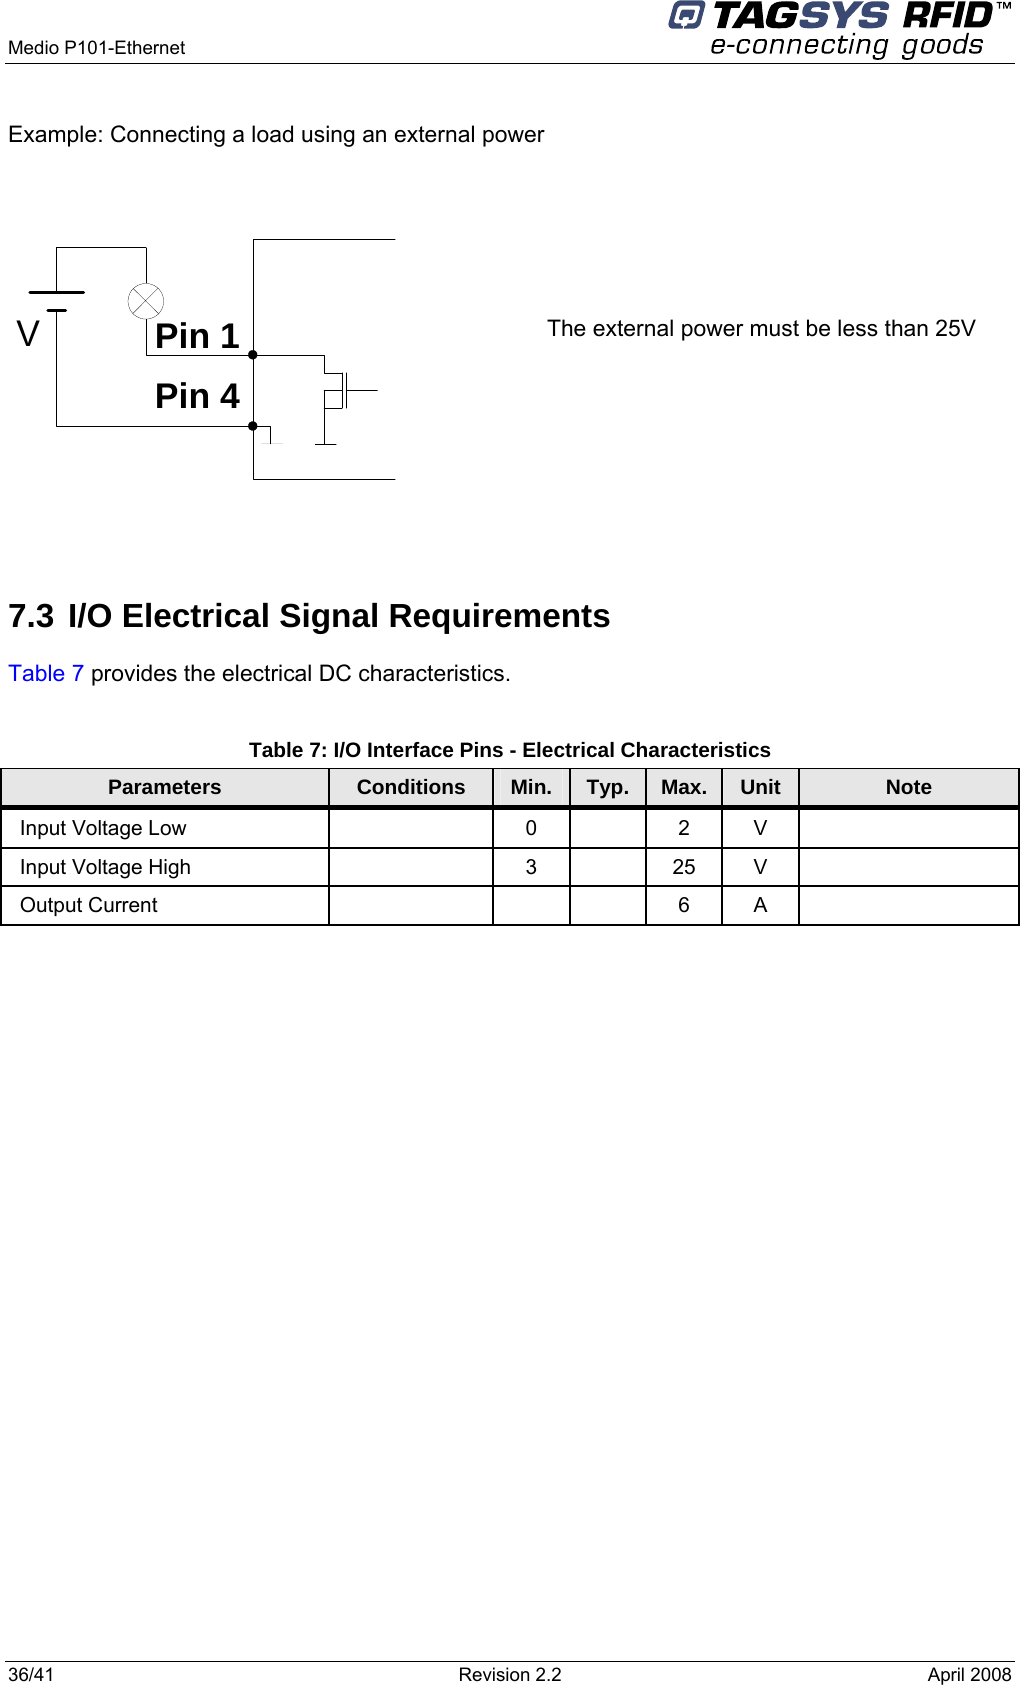  Medio P101-Ethernet     36/41  Revision 2.2  April 2008 Example: Connecting a load using an external power   Pin 4Pin 1V       The external power must be less than 25V  7.3 I/O Electrical Signal Requirements Table 7 provides the electrical DC characteristics.  Table 7: I/O Interface Pins - Electrical Characteristics Parameters  Conditions  Min.  Typ.  Max.  Unit  Note Input Voltage Low    0    2  V   Input Voltage High    3    25  V   Output Current        6  A   